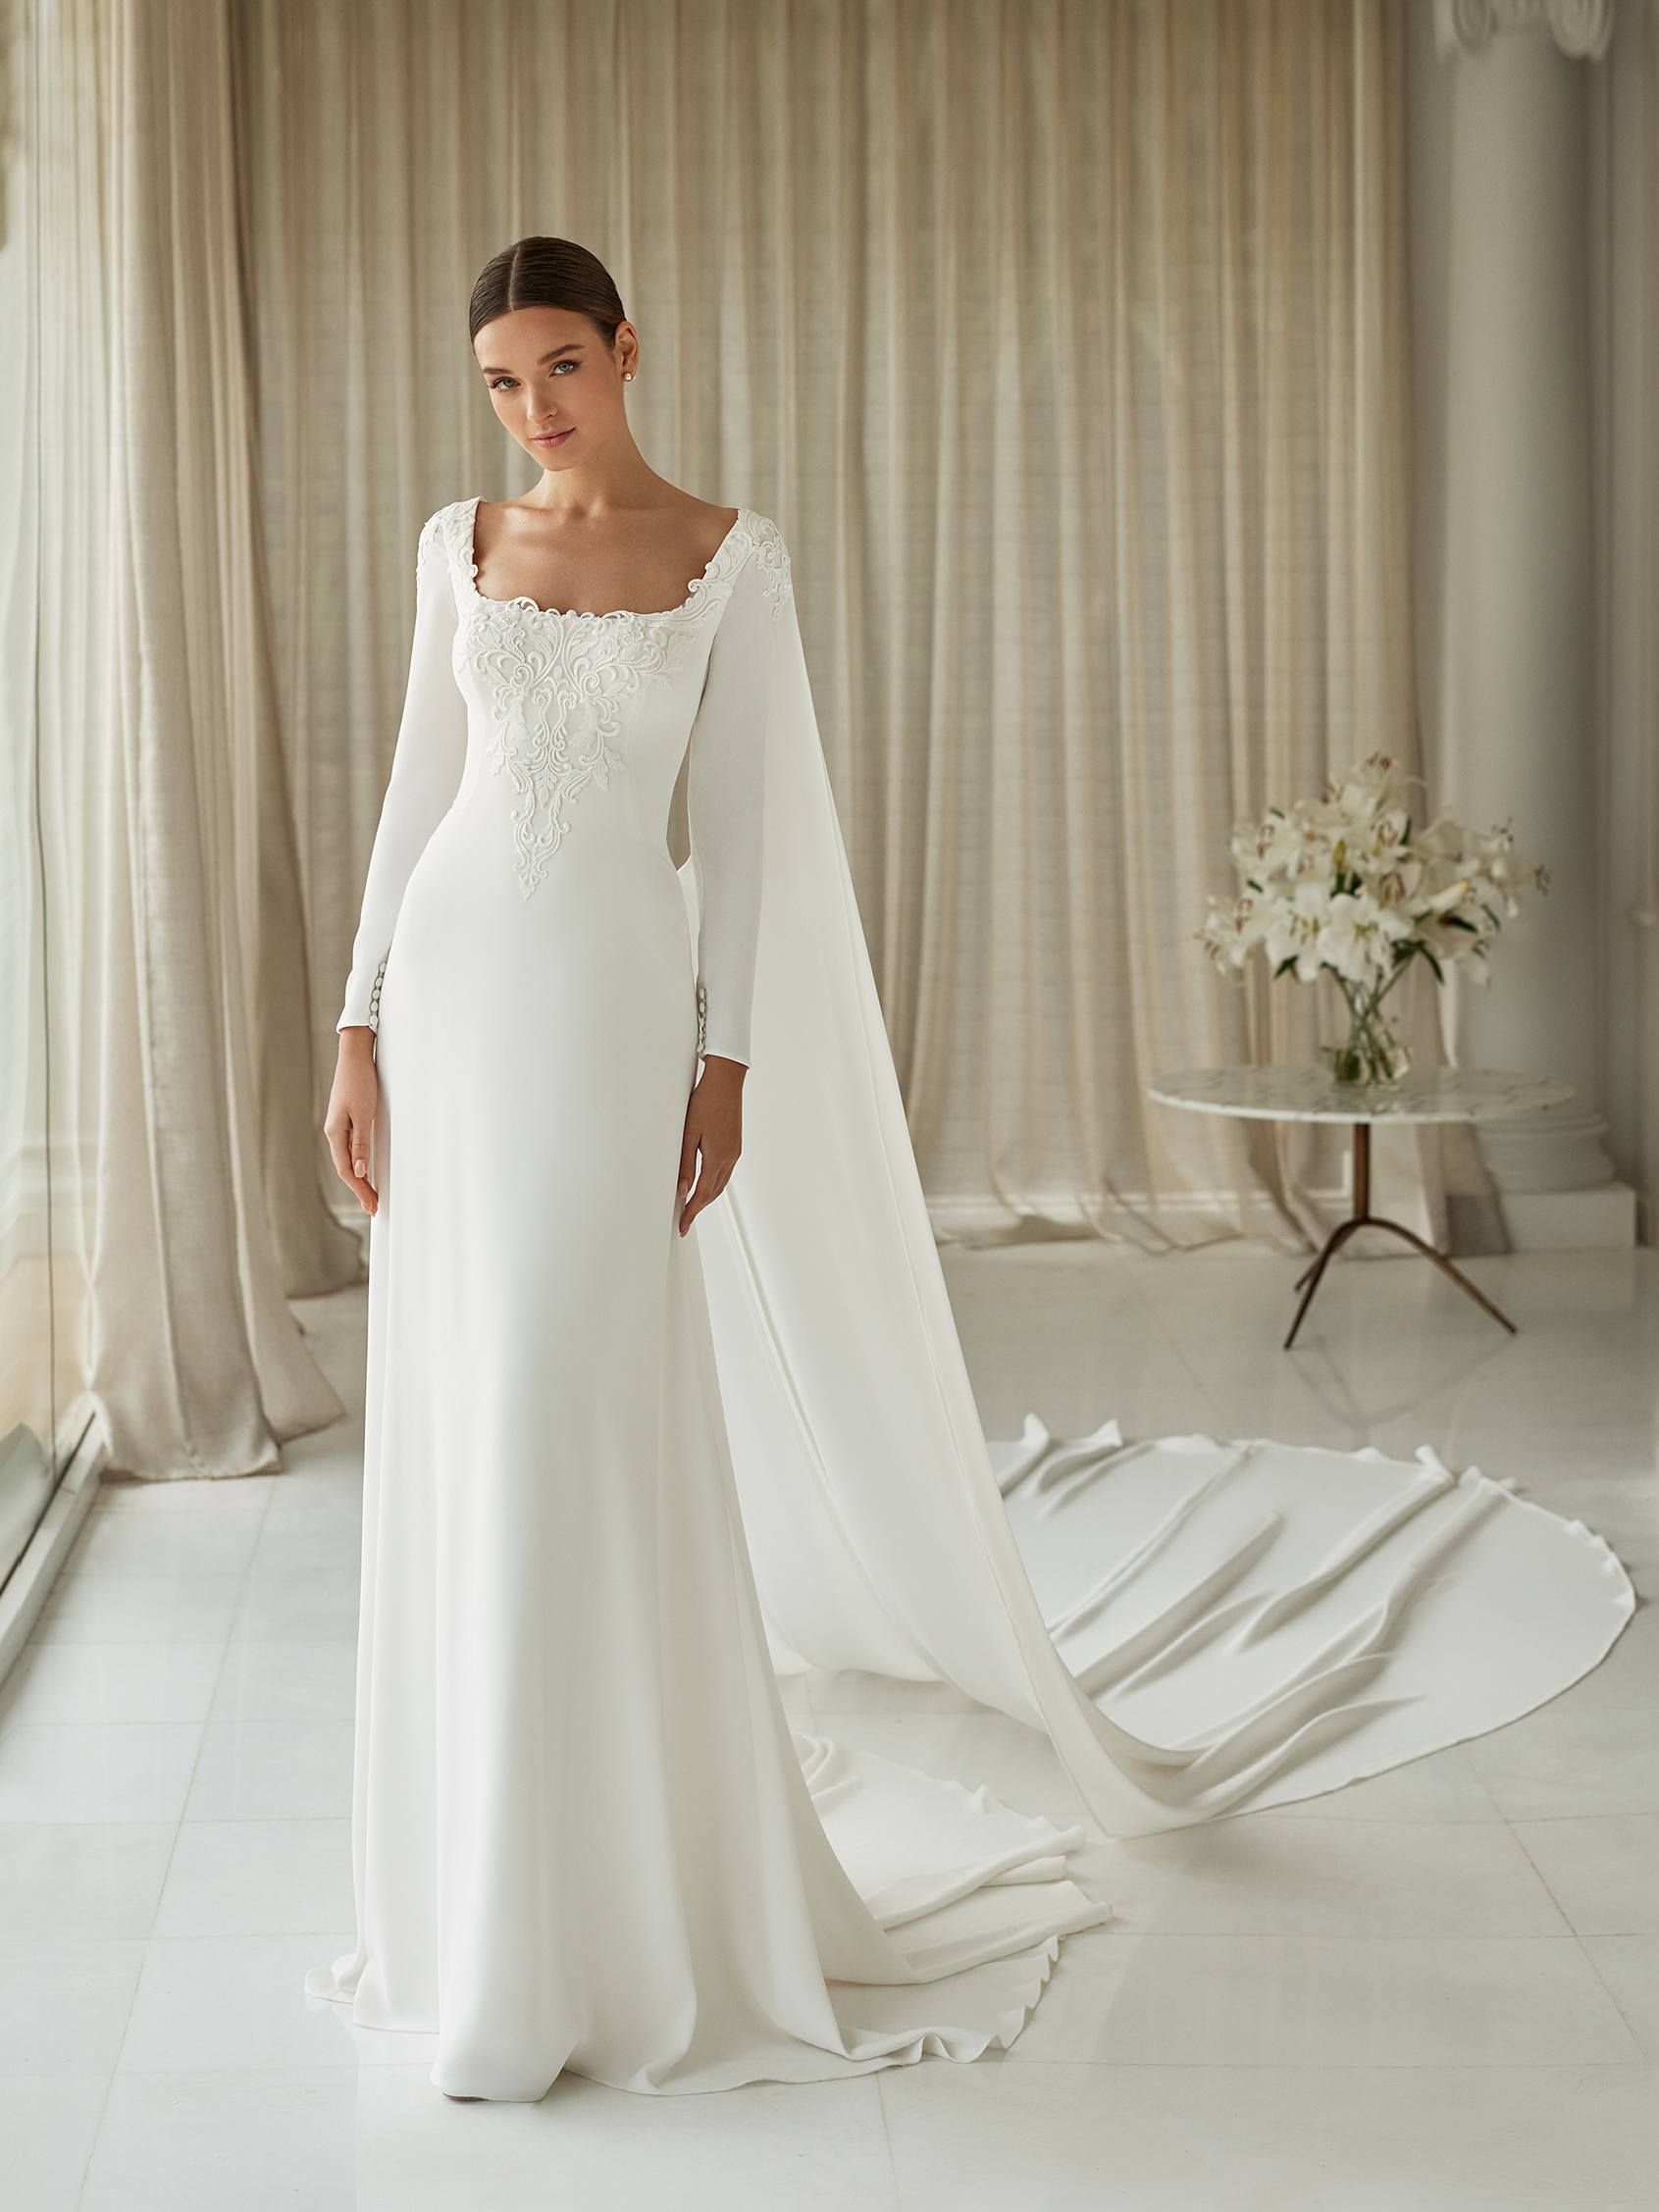 What To Look For When Shopping For Winter Wedding Dresses ⋆ Ruffled